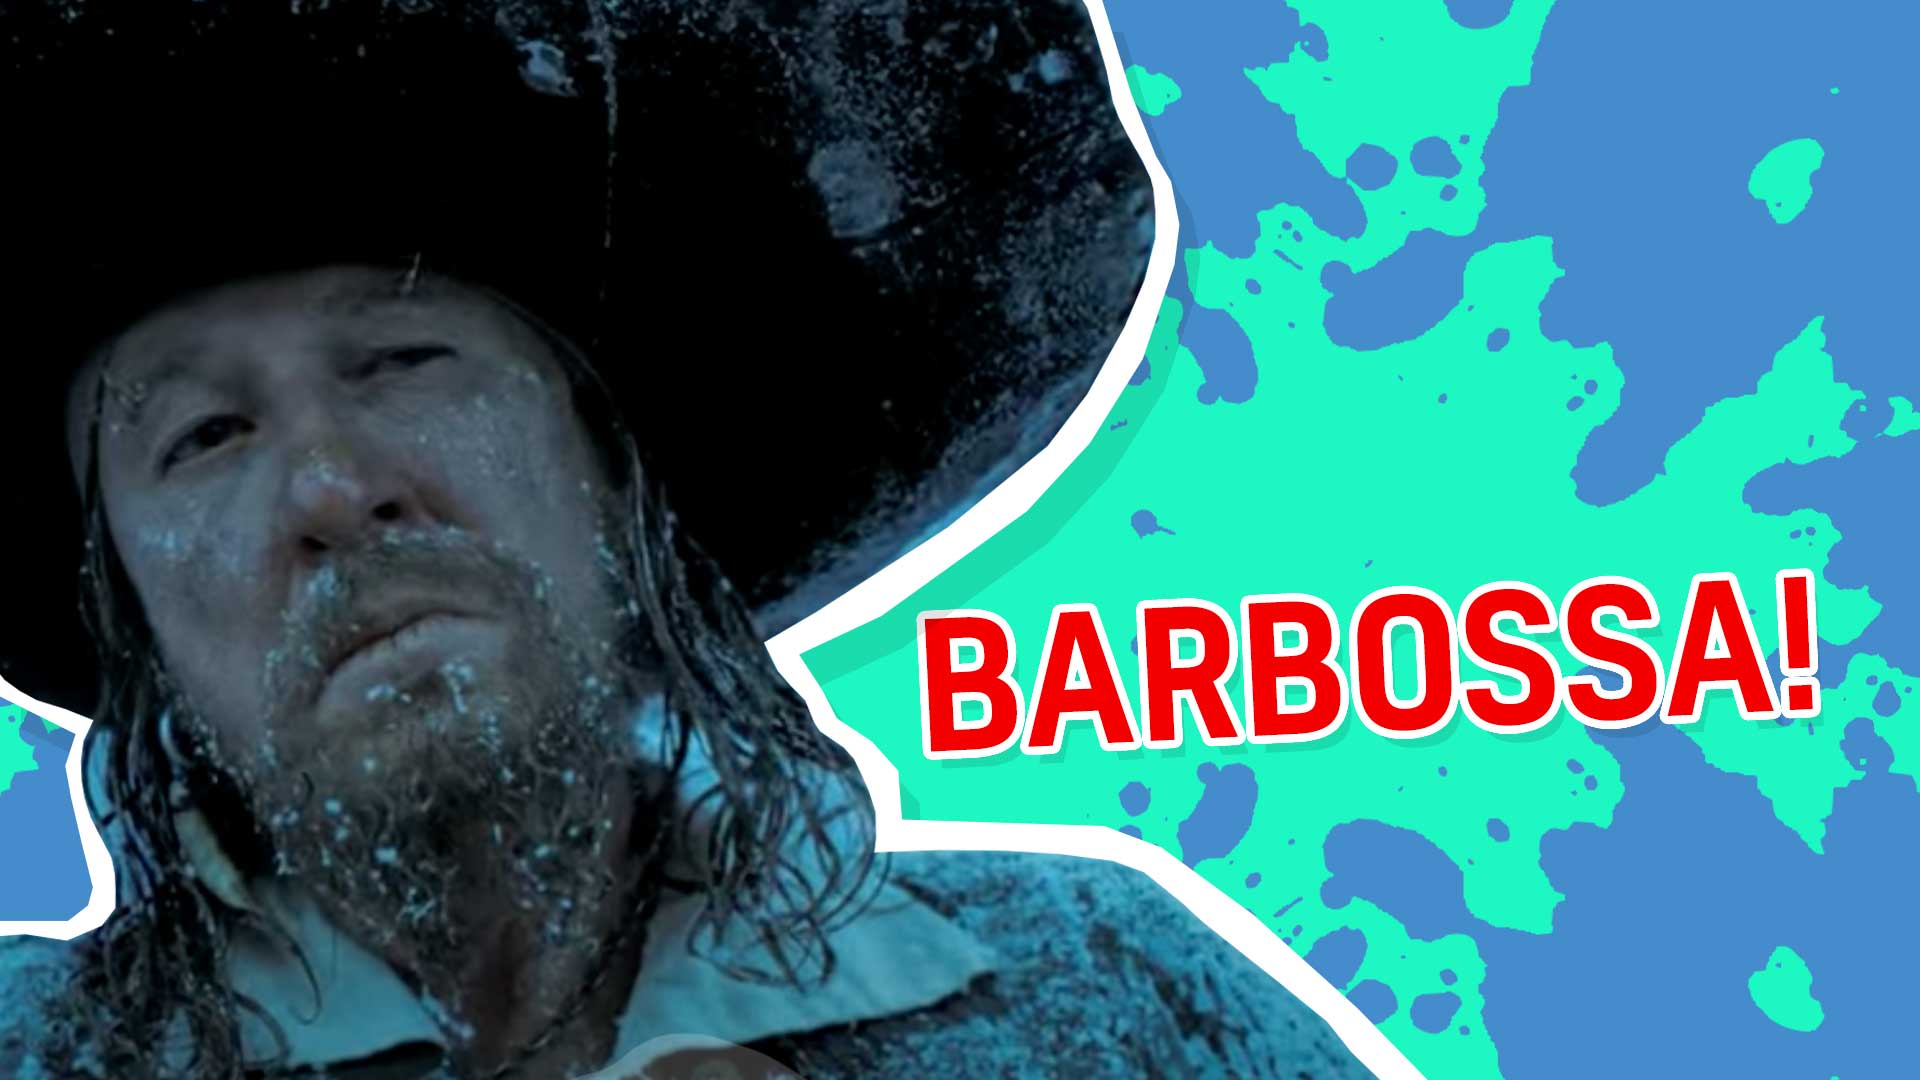 You are Barbossa!